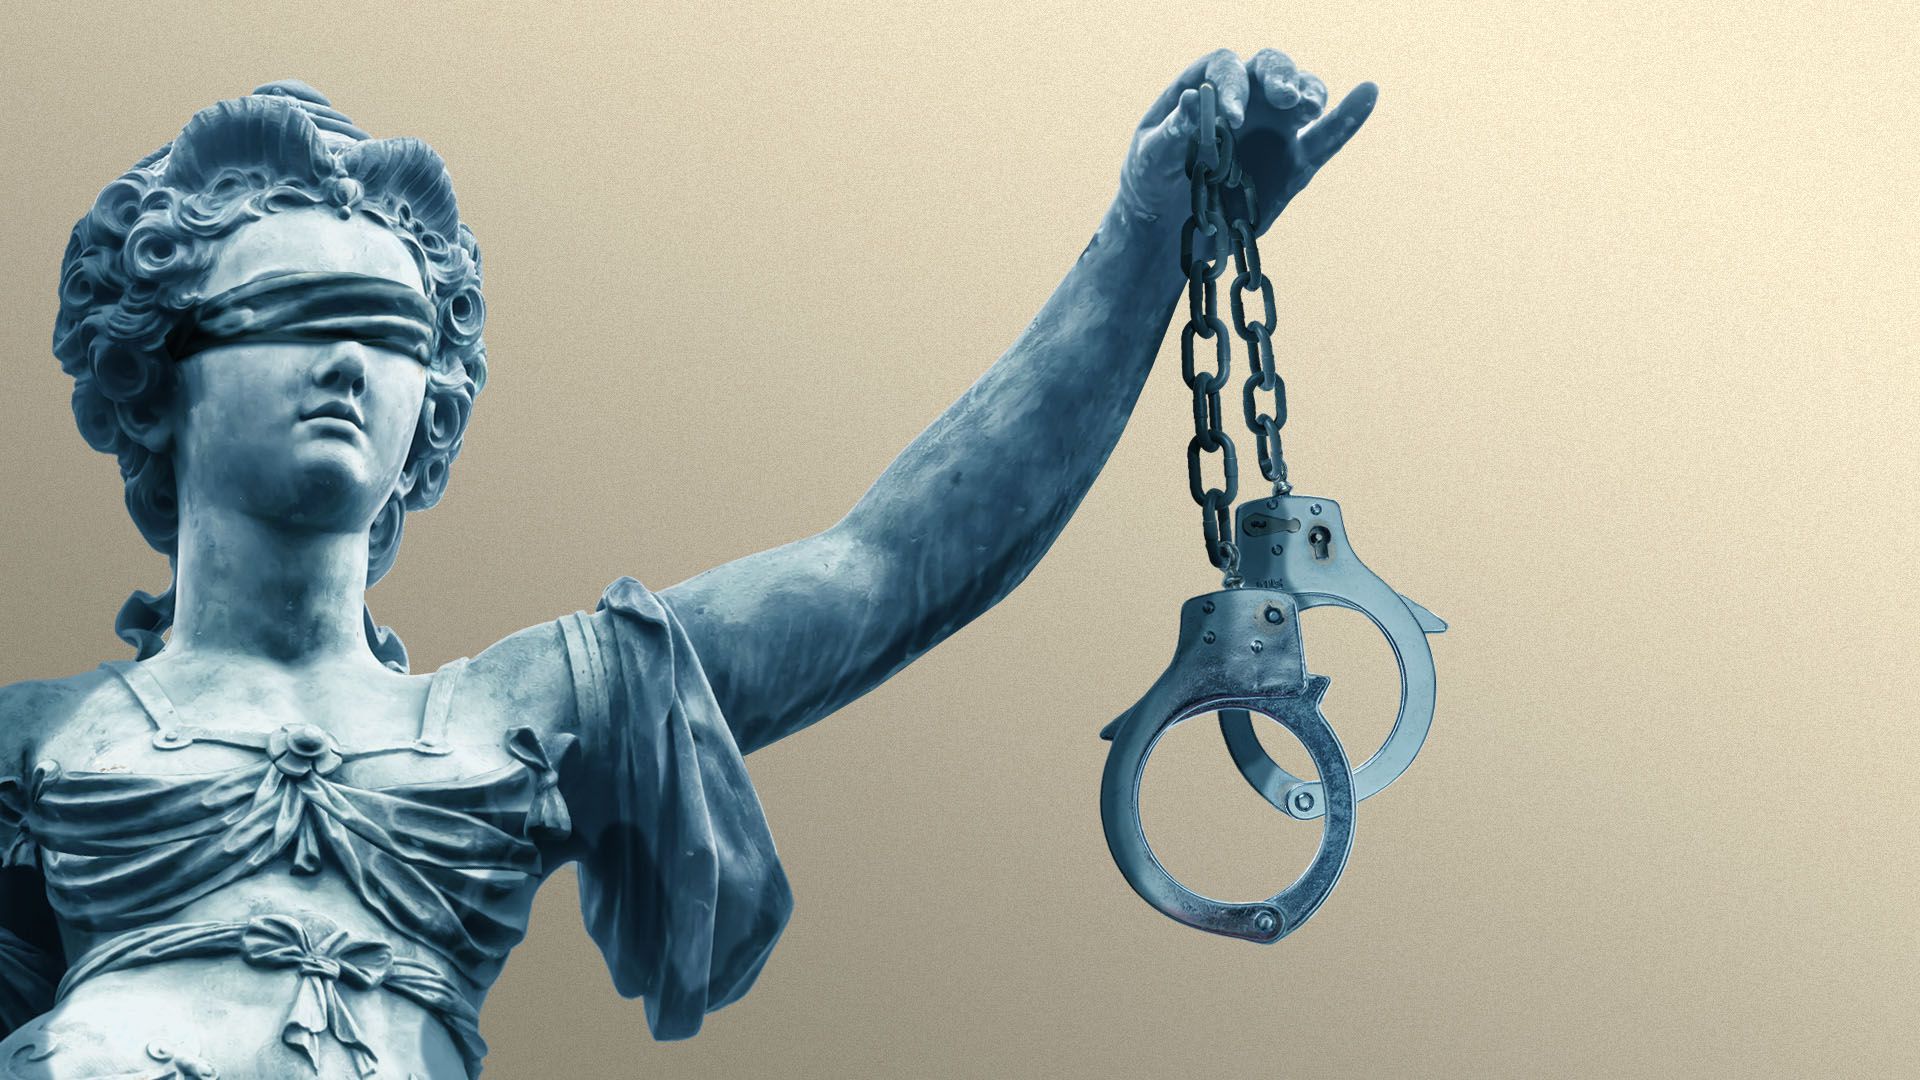 Illustration of the statue of Justice holding handcuffs in place of a scale